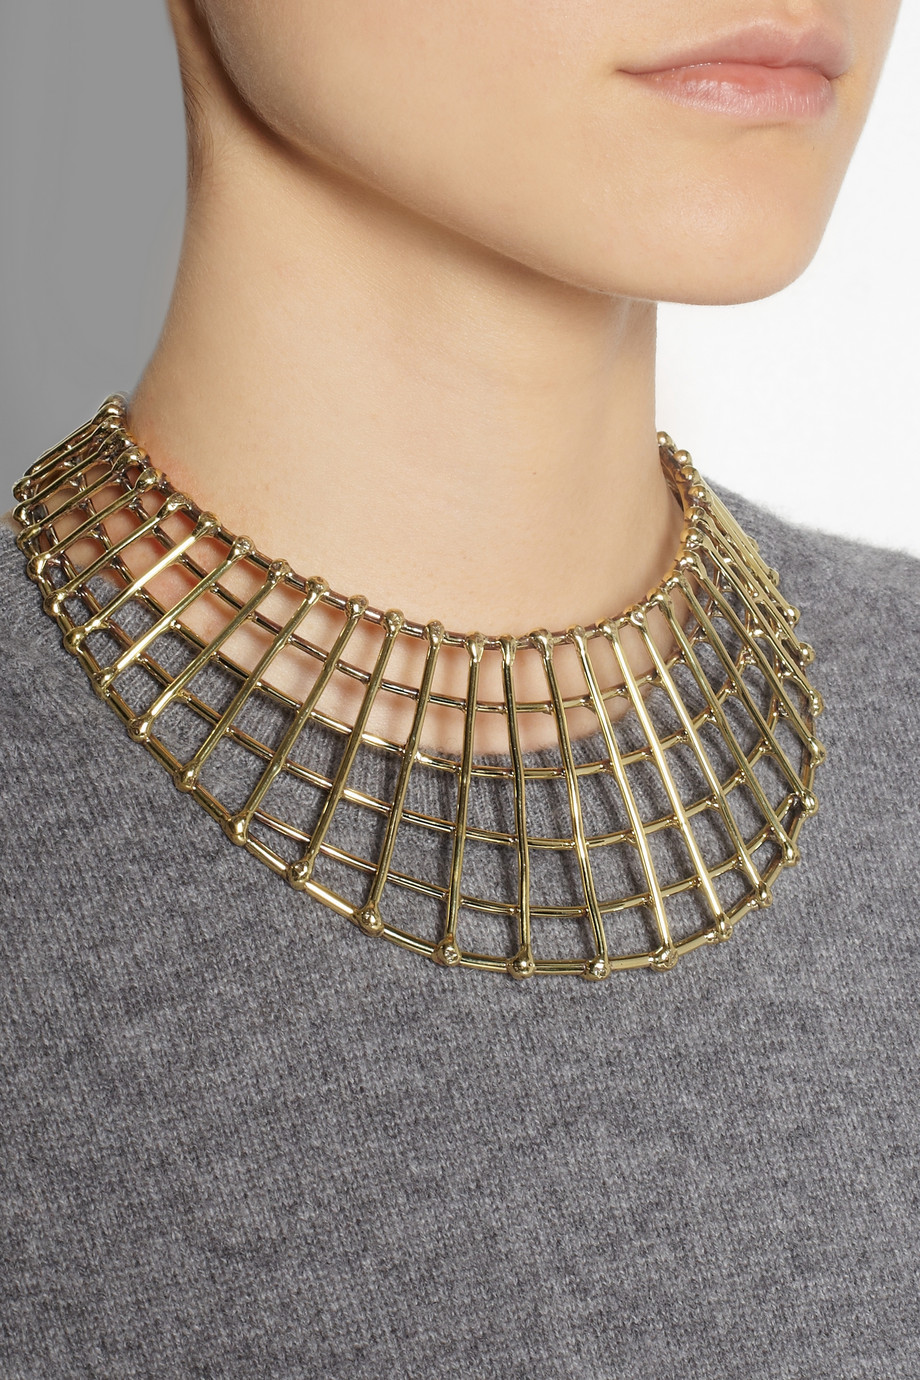 Anndra neen Gold Tone Cage Necklace in Metallic | Lyst